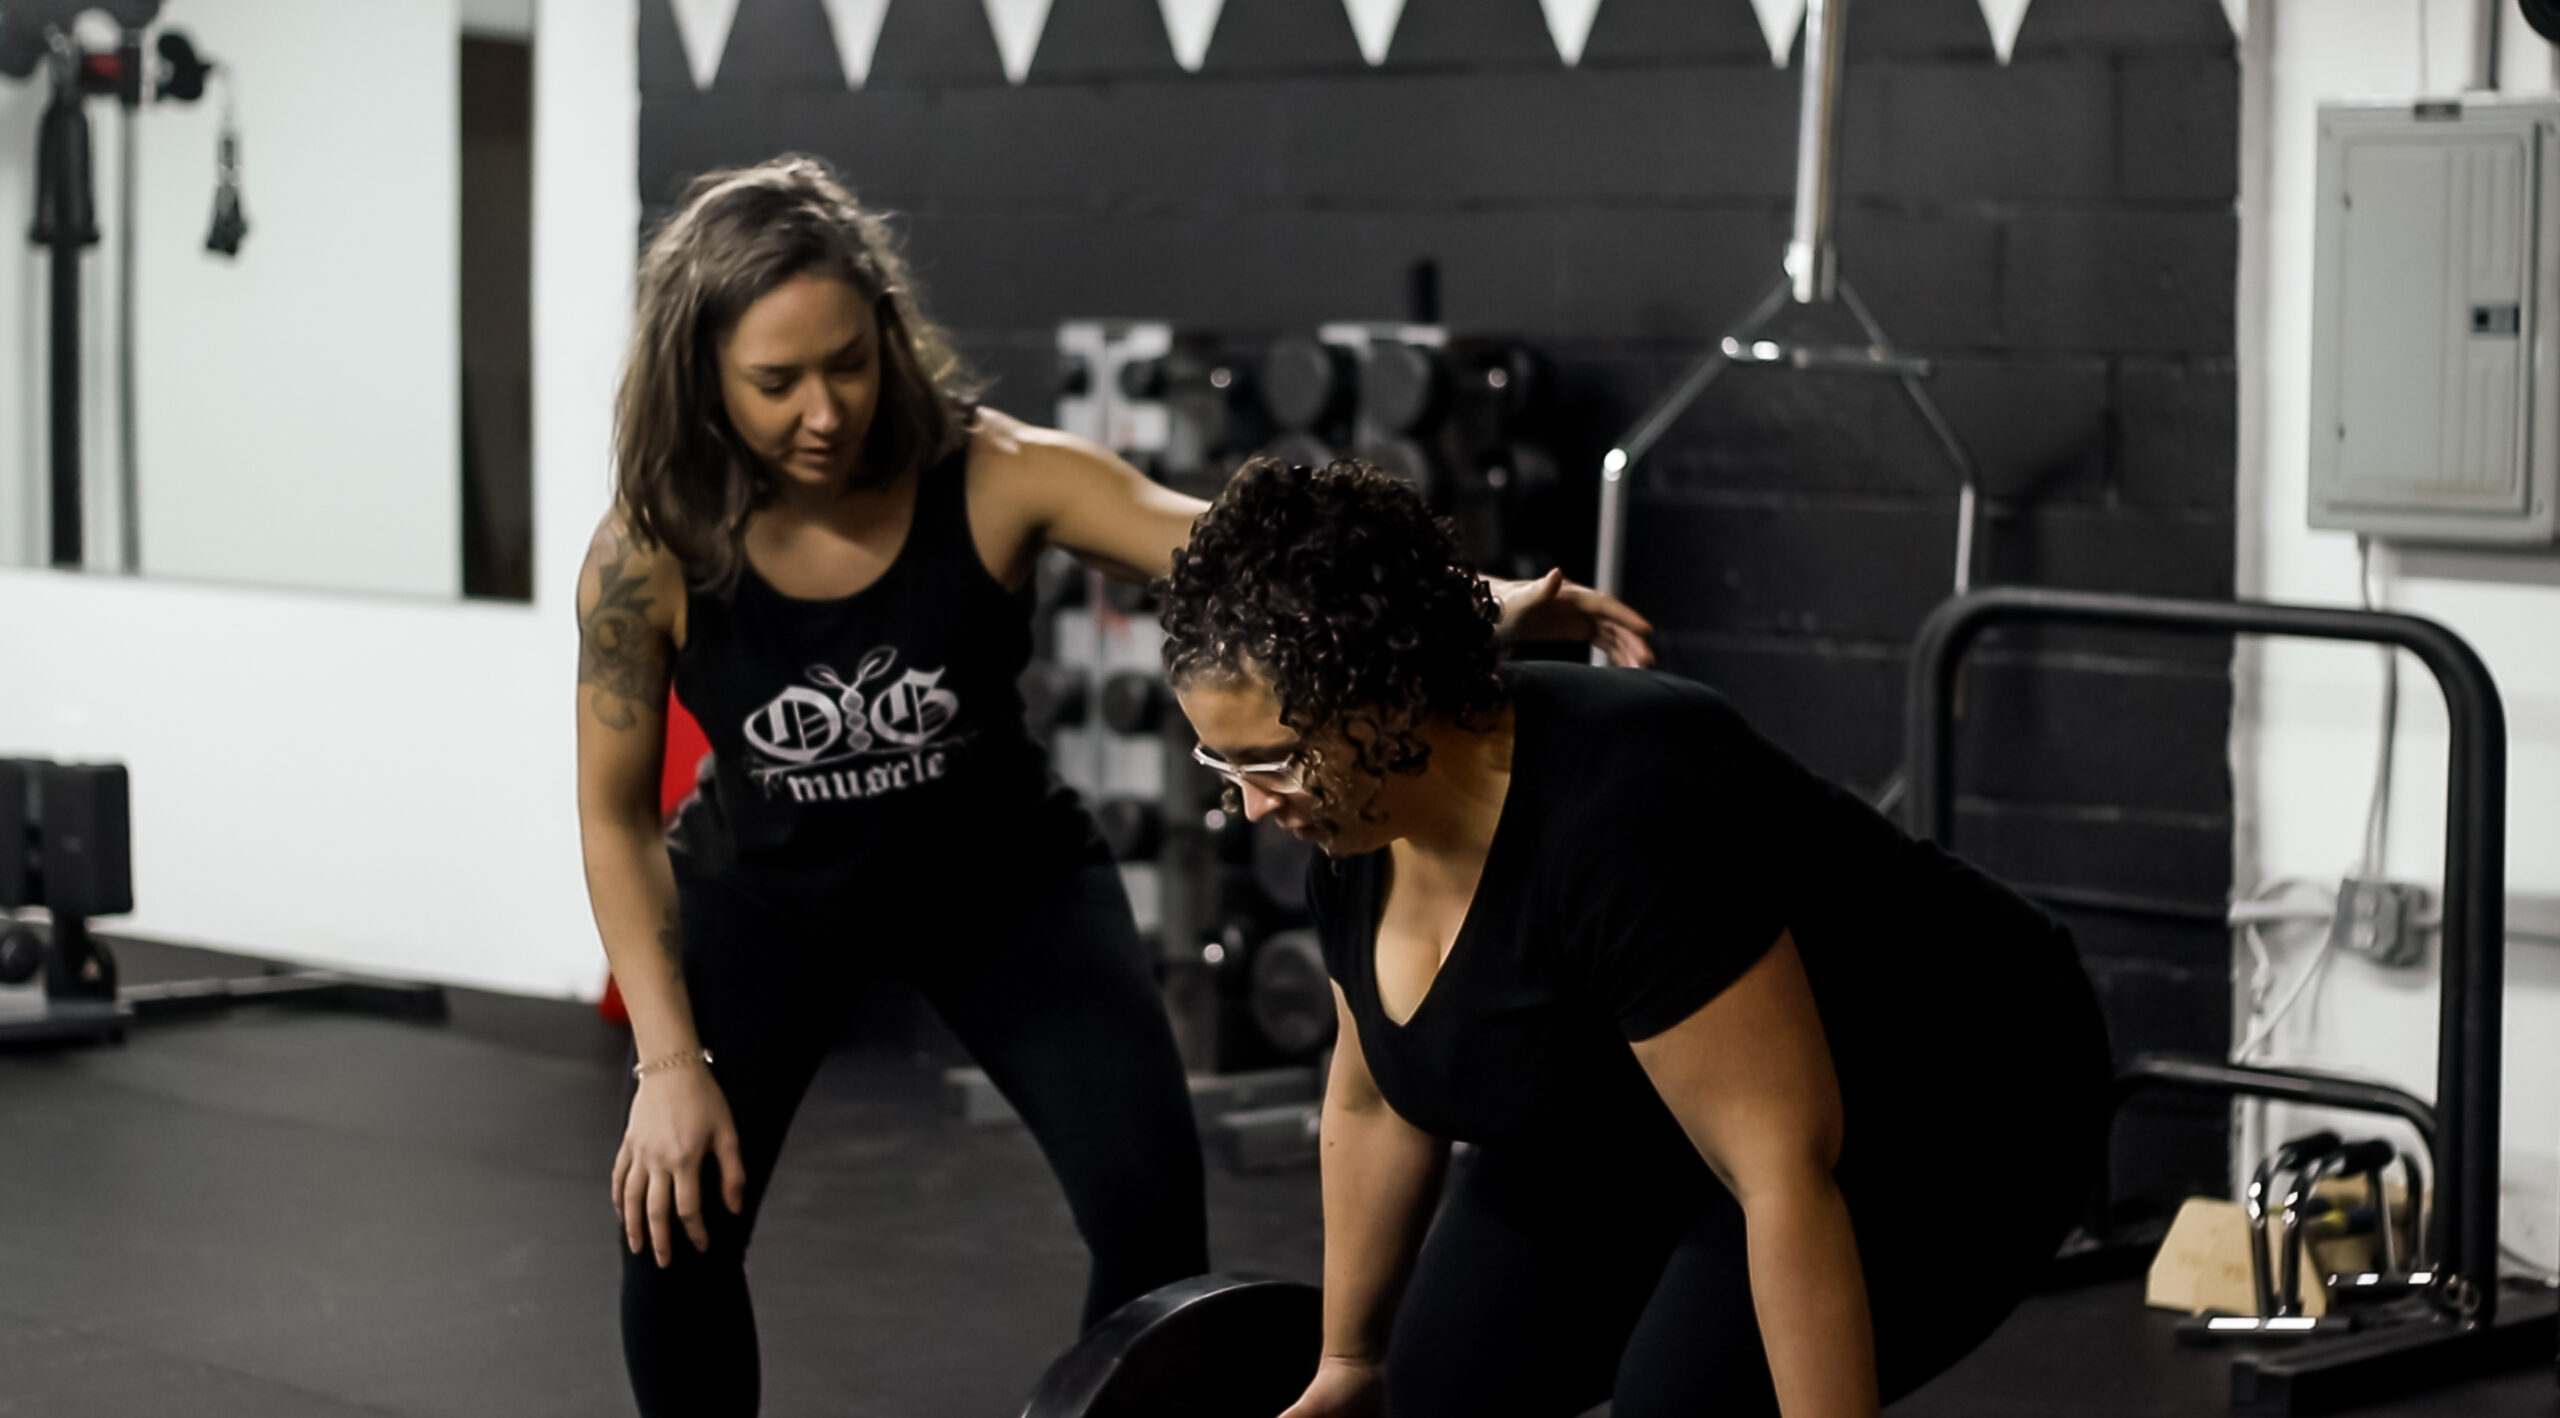 Certified Personal Fitness Trainer in Tacoma Washington